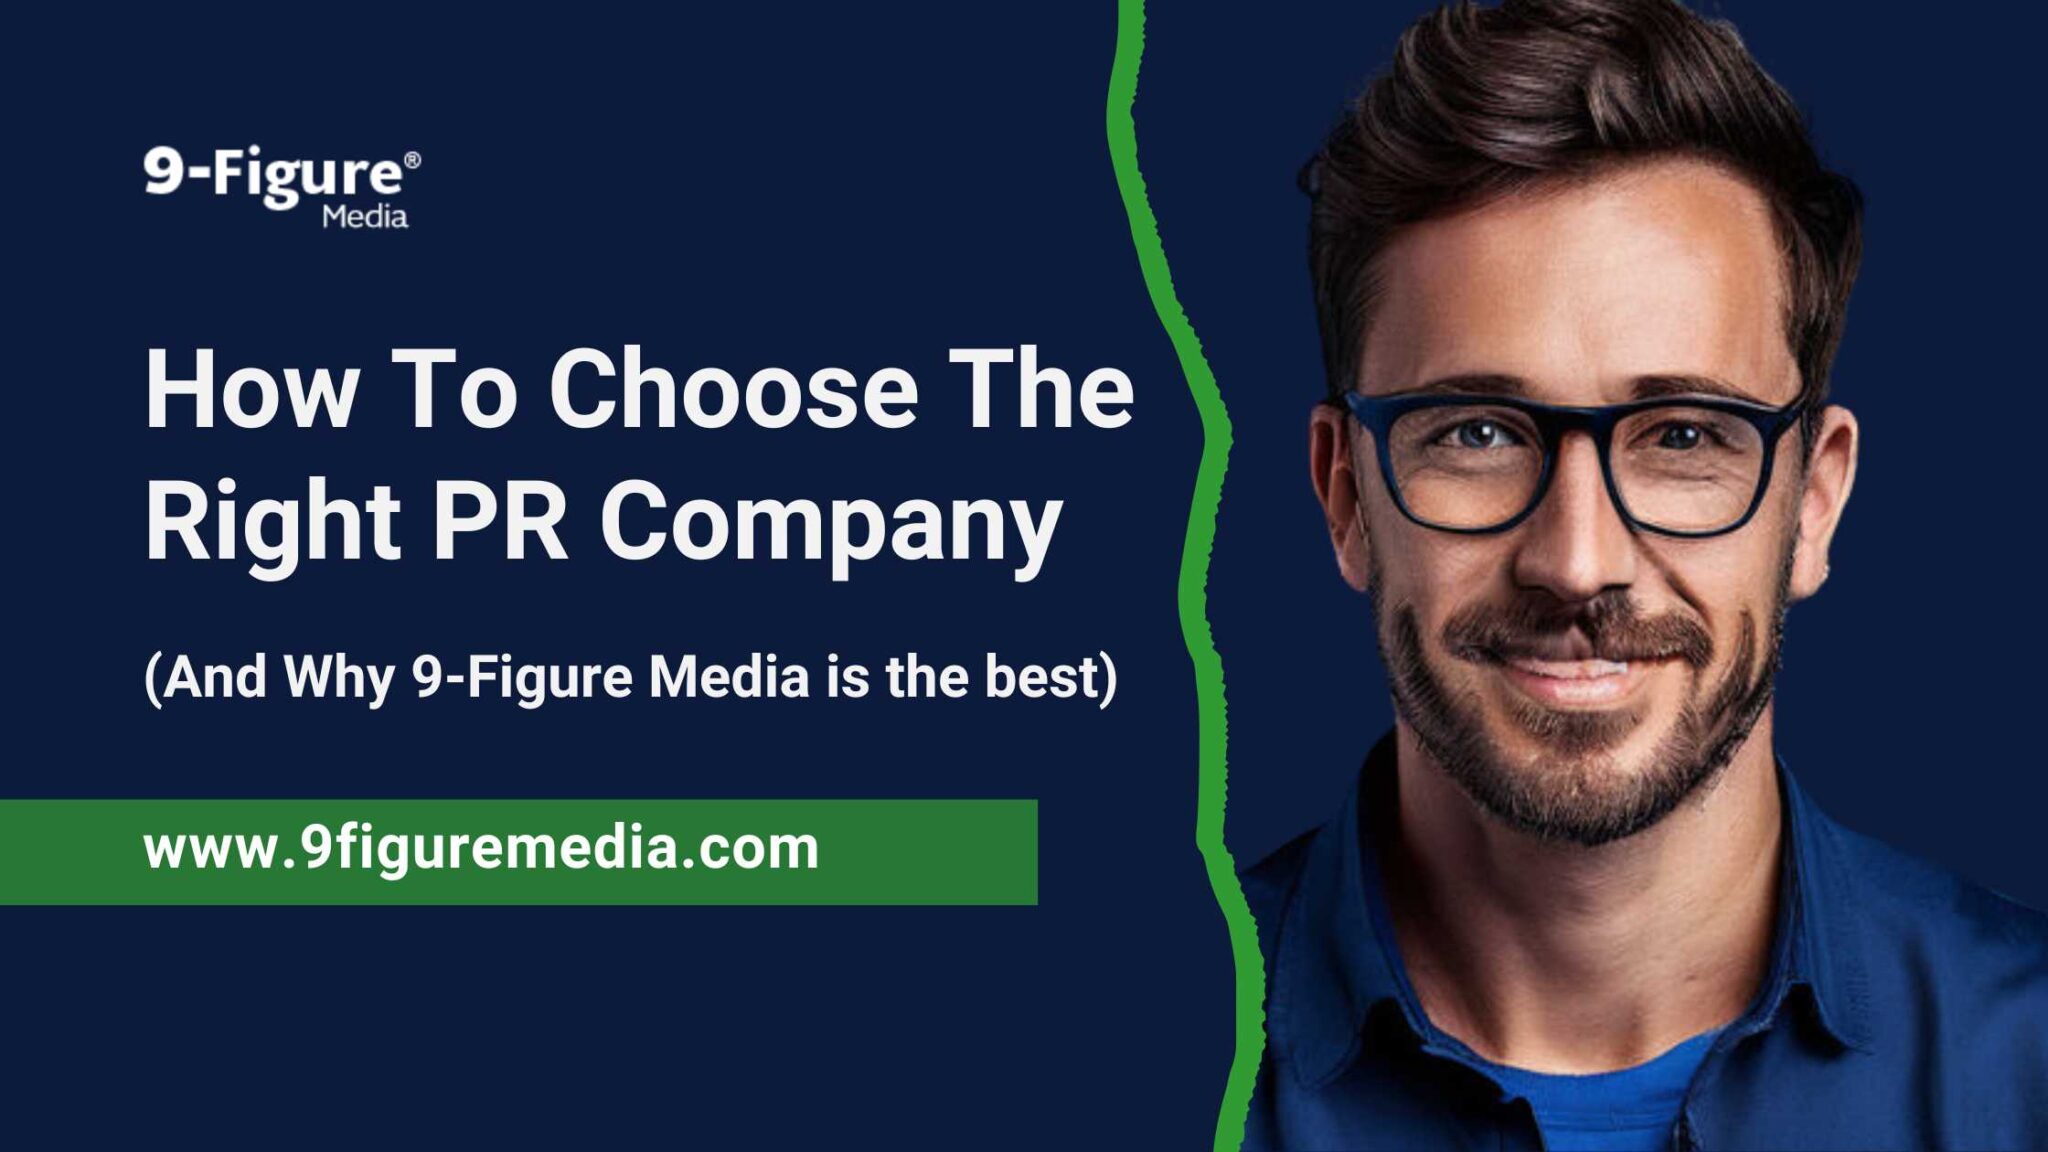 How To Choose The Right PR Company (And Why 9-Figure Media is the best)